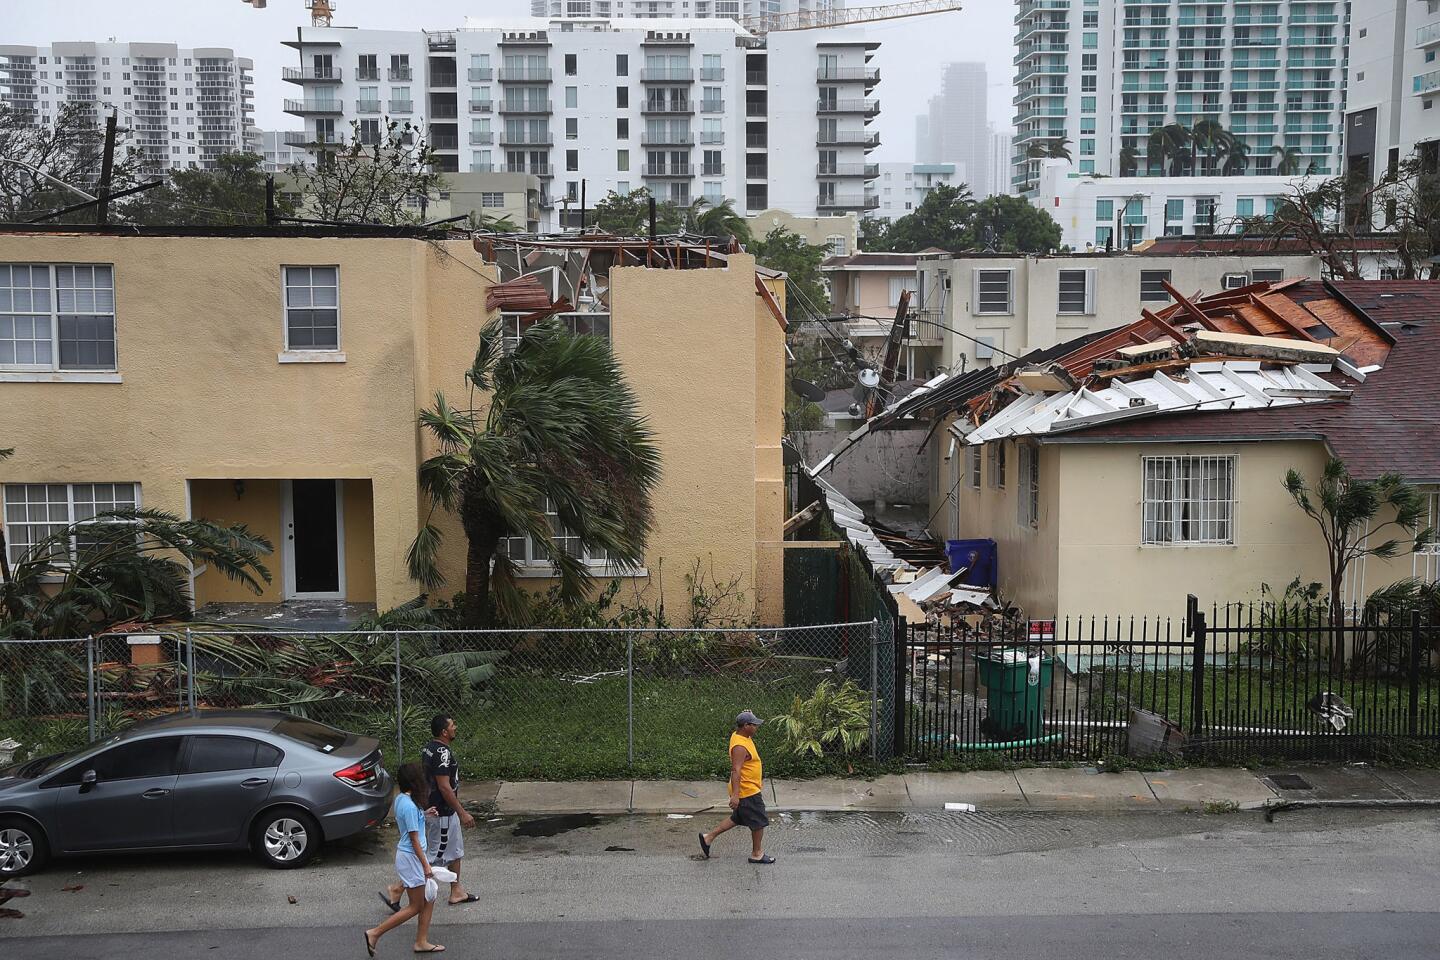 People walk past a building where the roof was blown off by Hurricane Irma on Sept. 10, 2017 in Miami.